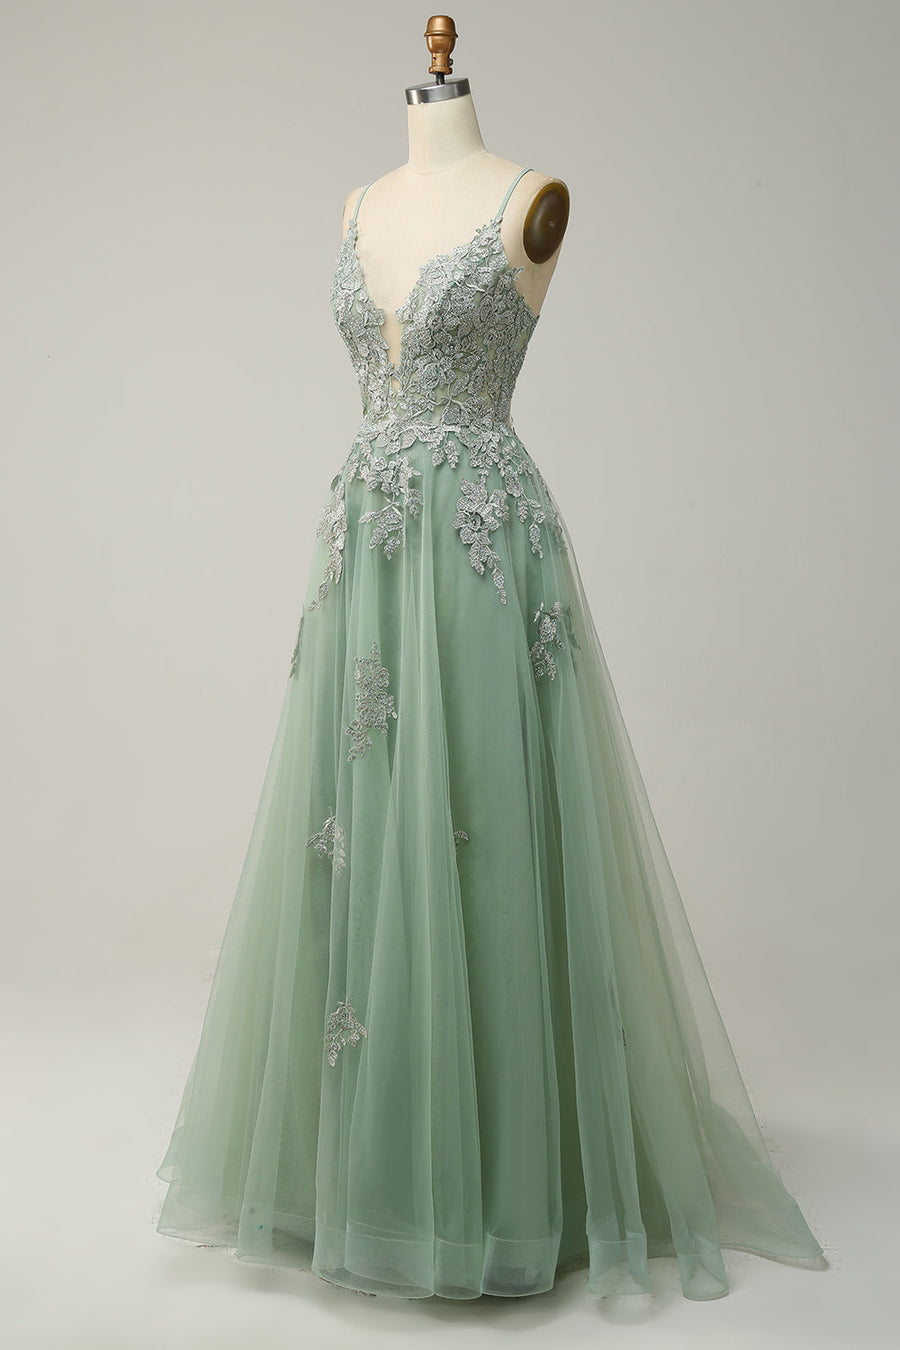 Dusty Sage Plunging V Neck Appliques Lace-Up A-line Long Prom Dress